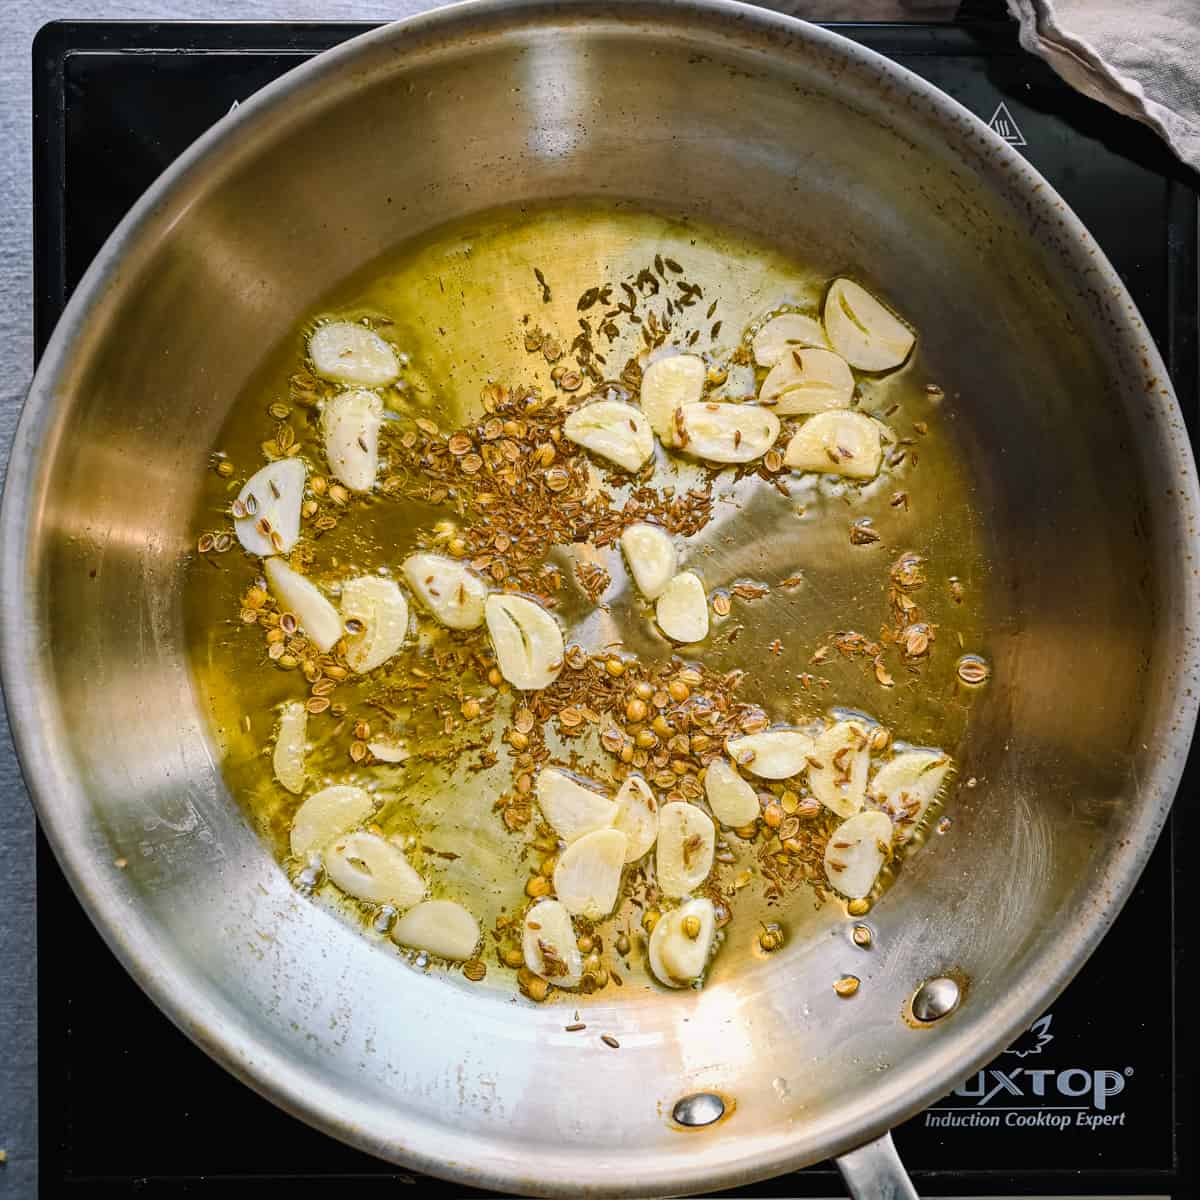 sliced garlic and cumin and coriander seeds frying in olive oil in a frying pan